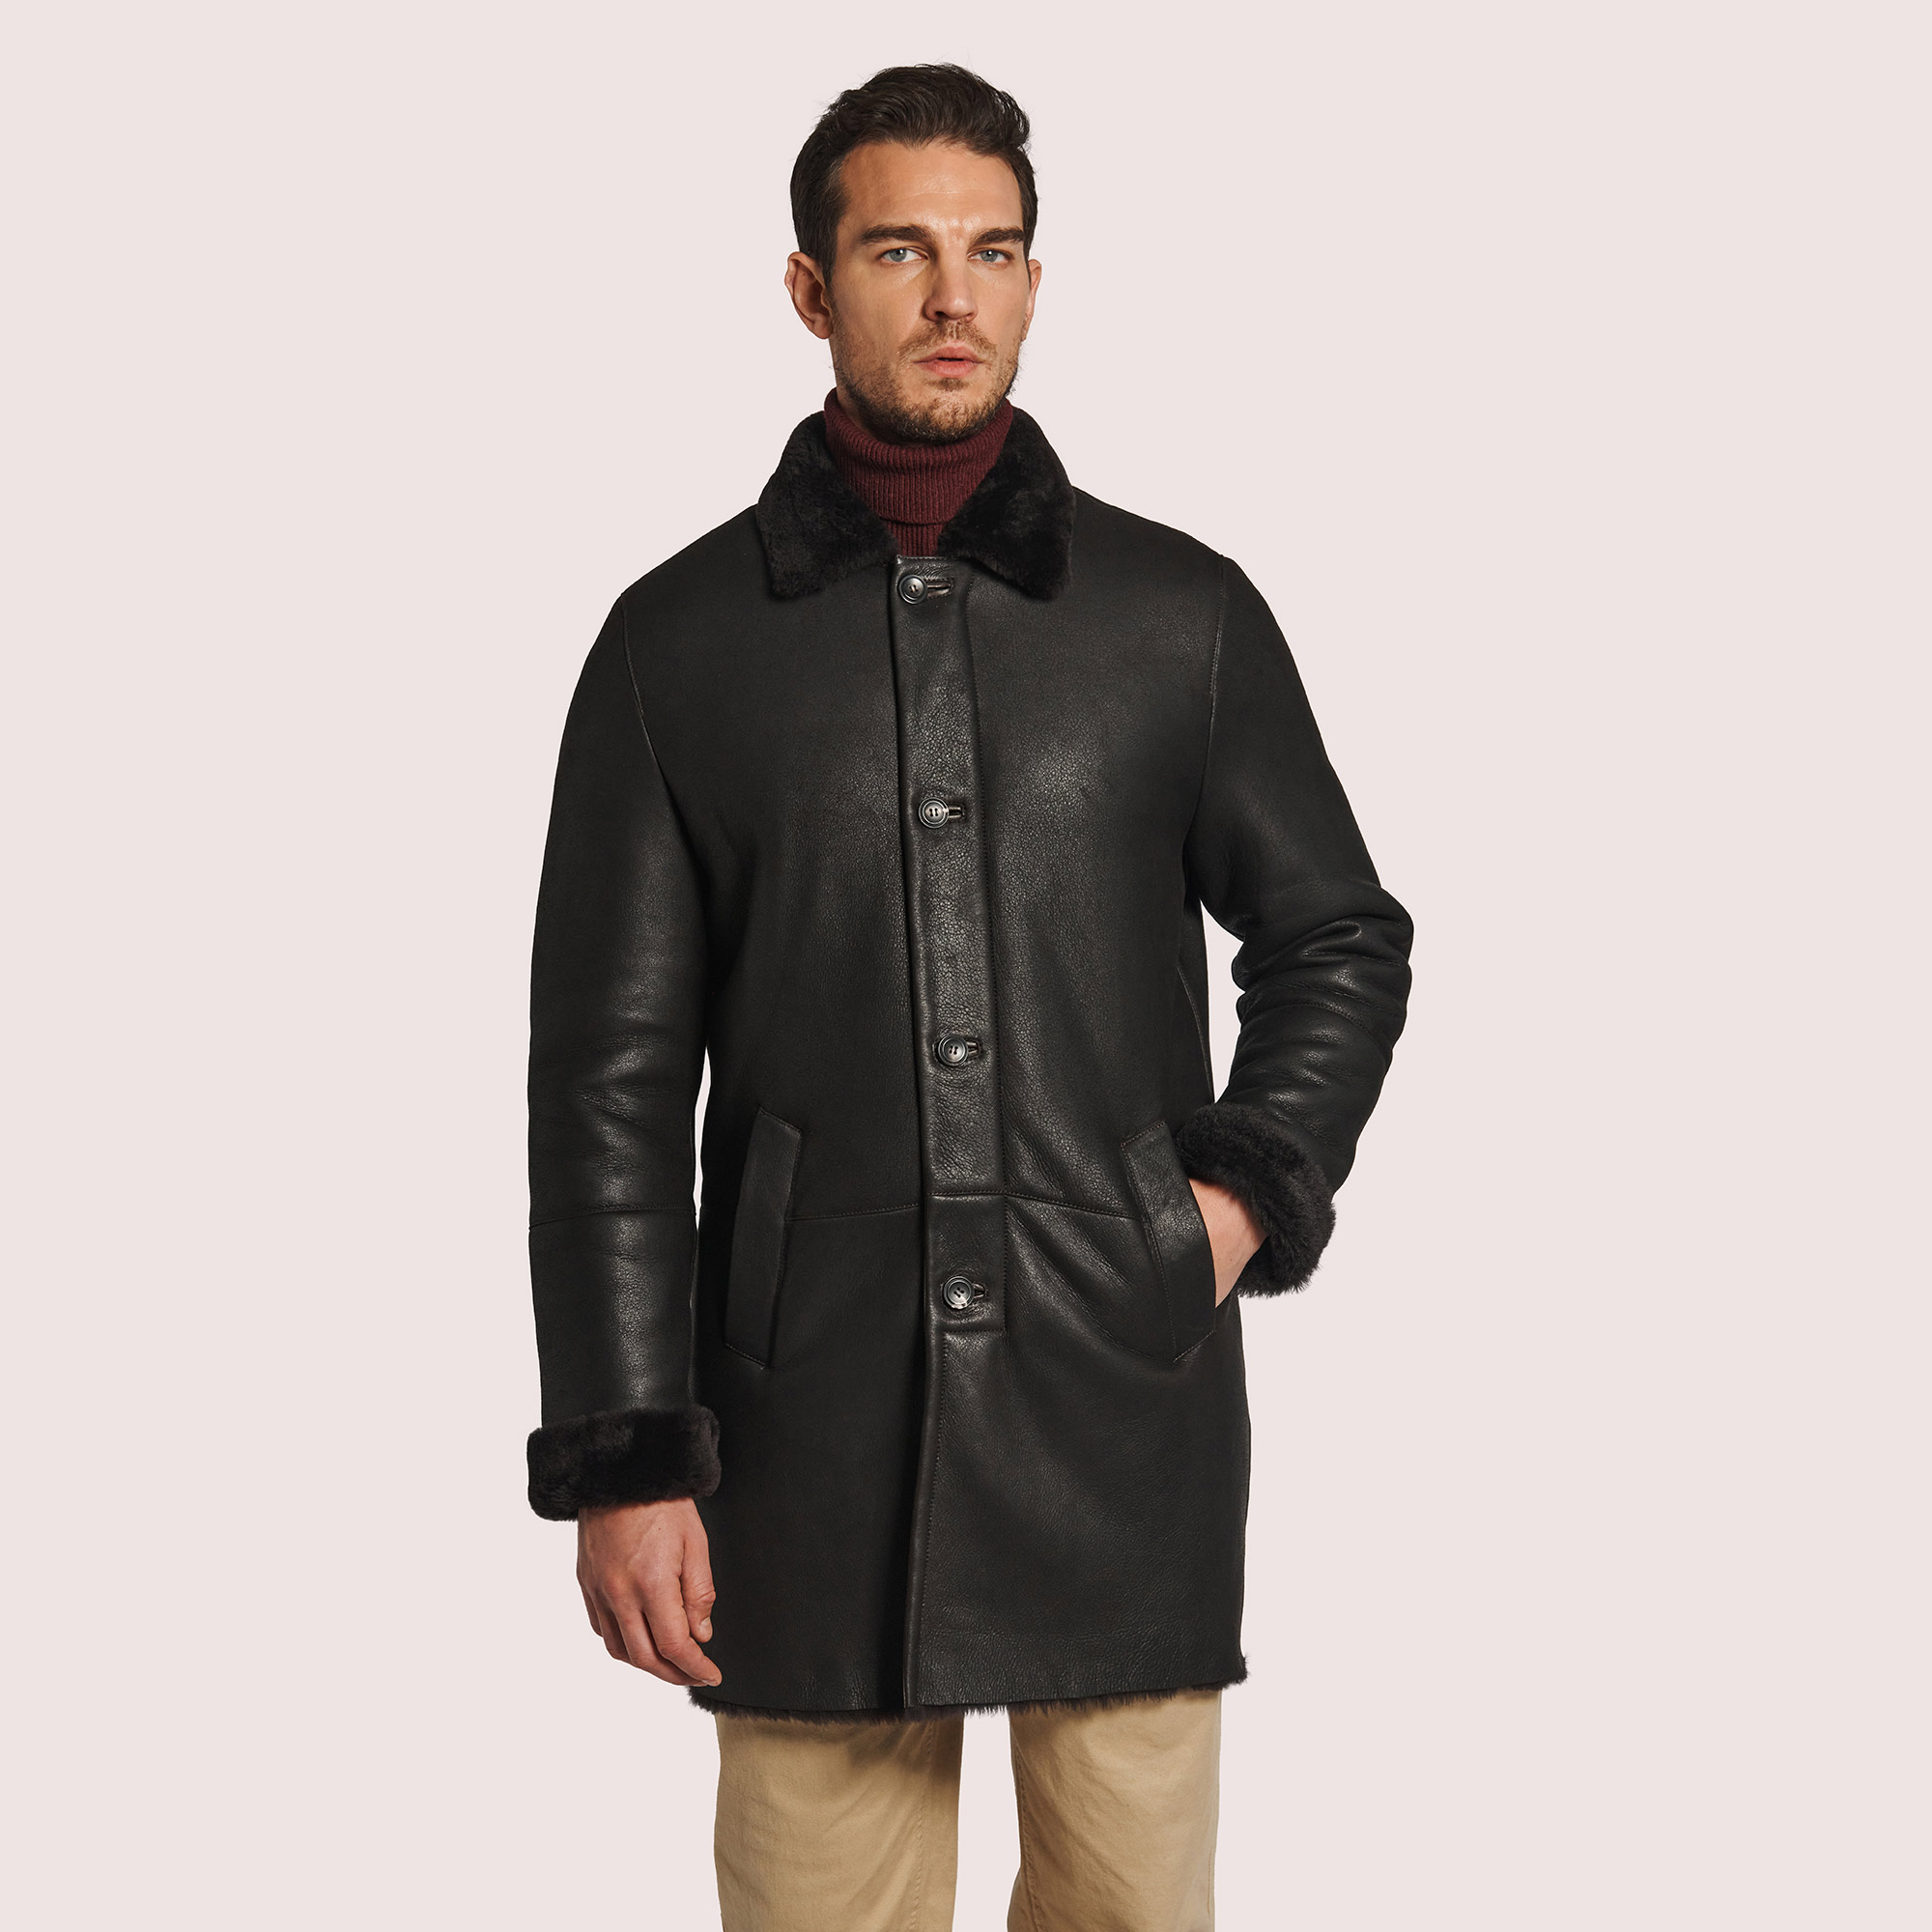 Aston Leather | Miles Shearling Coat